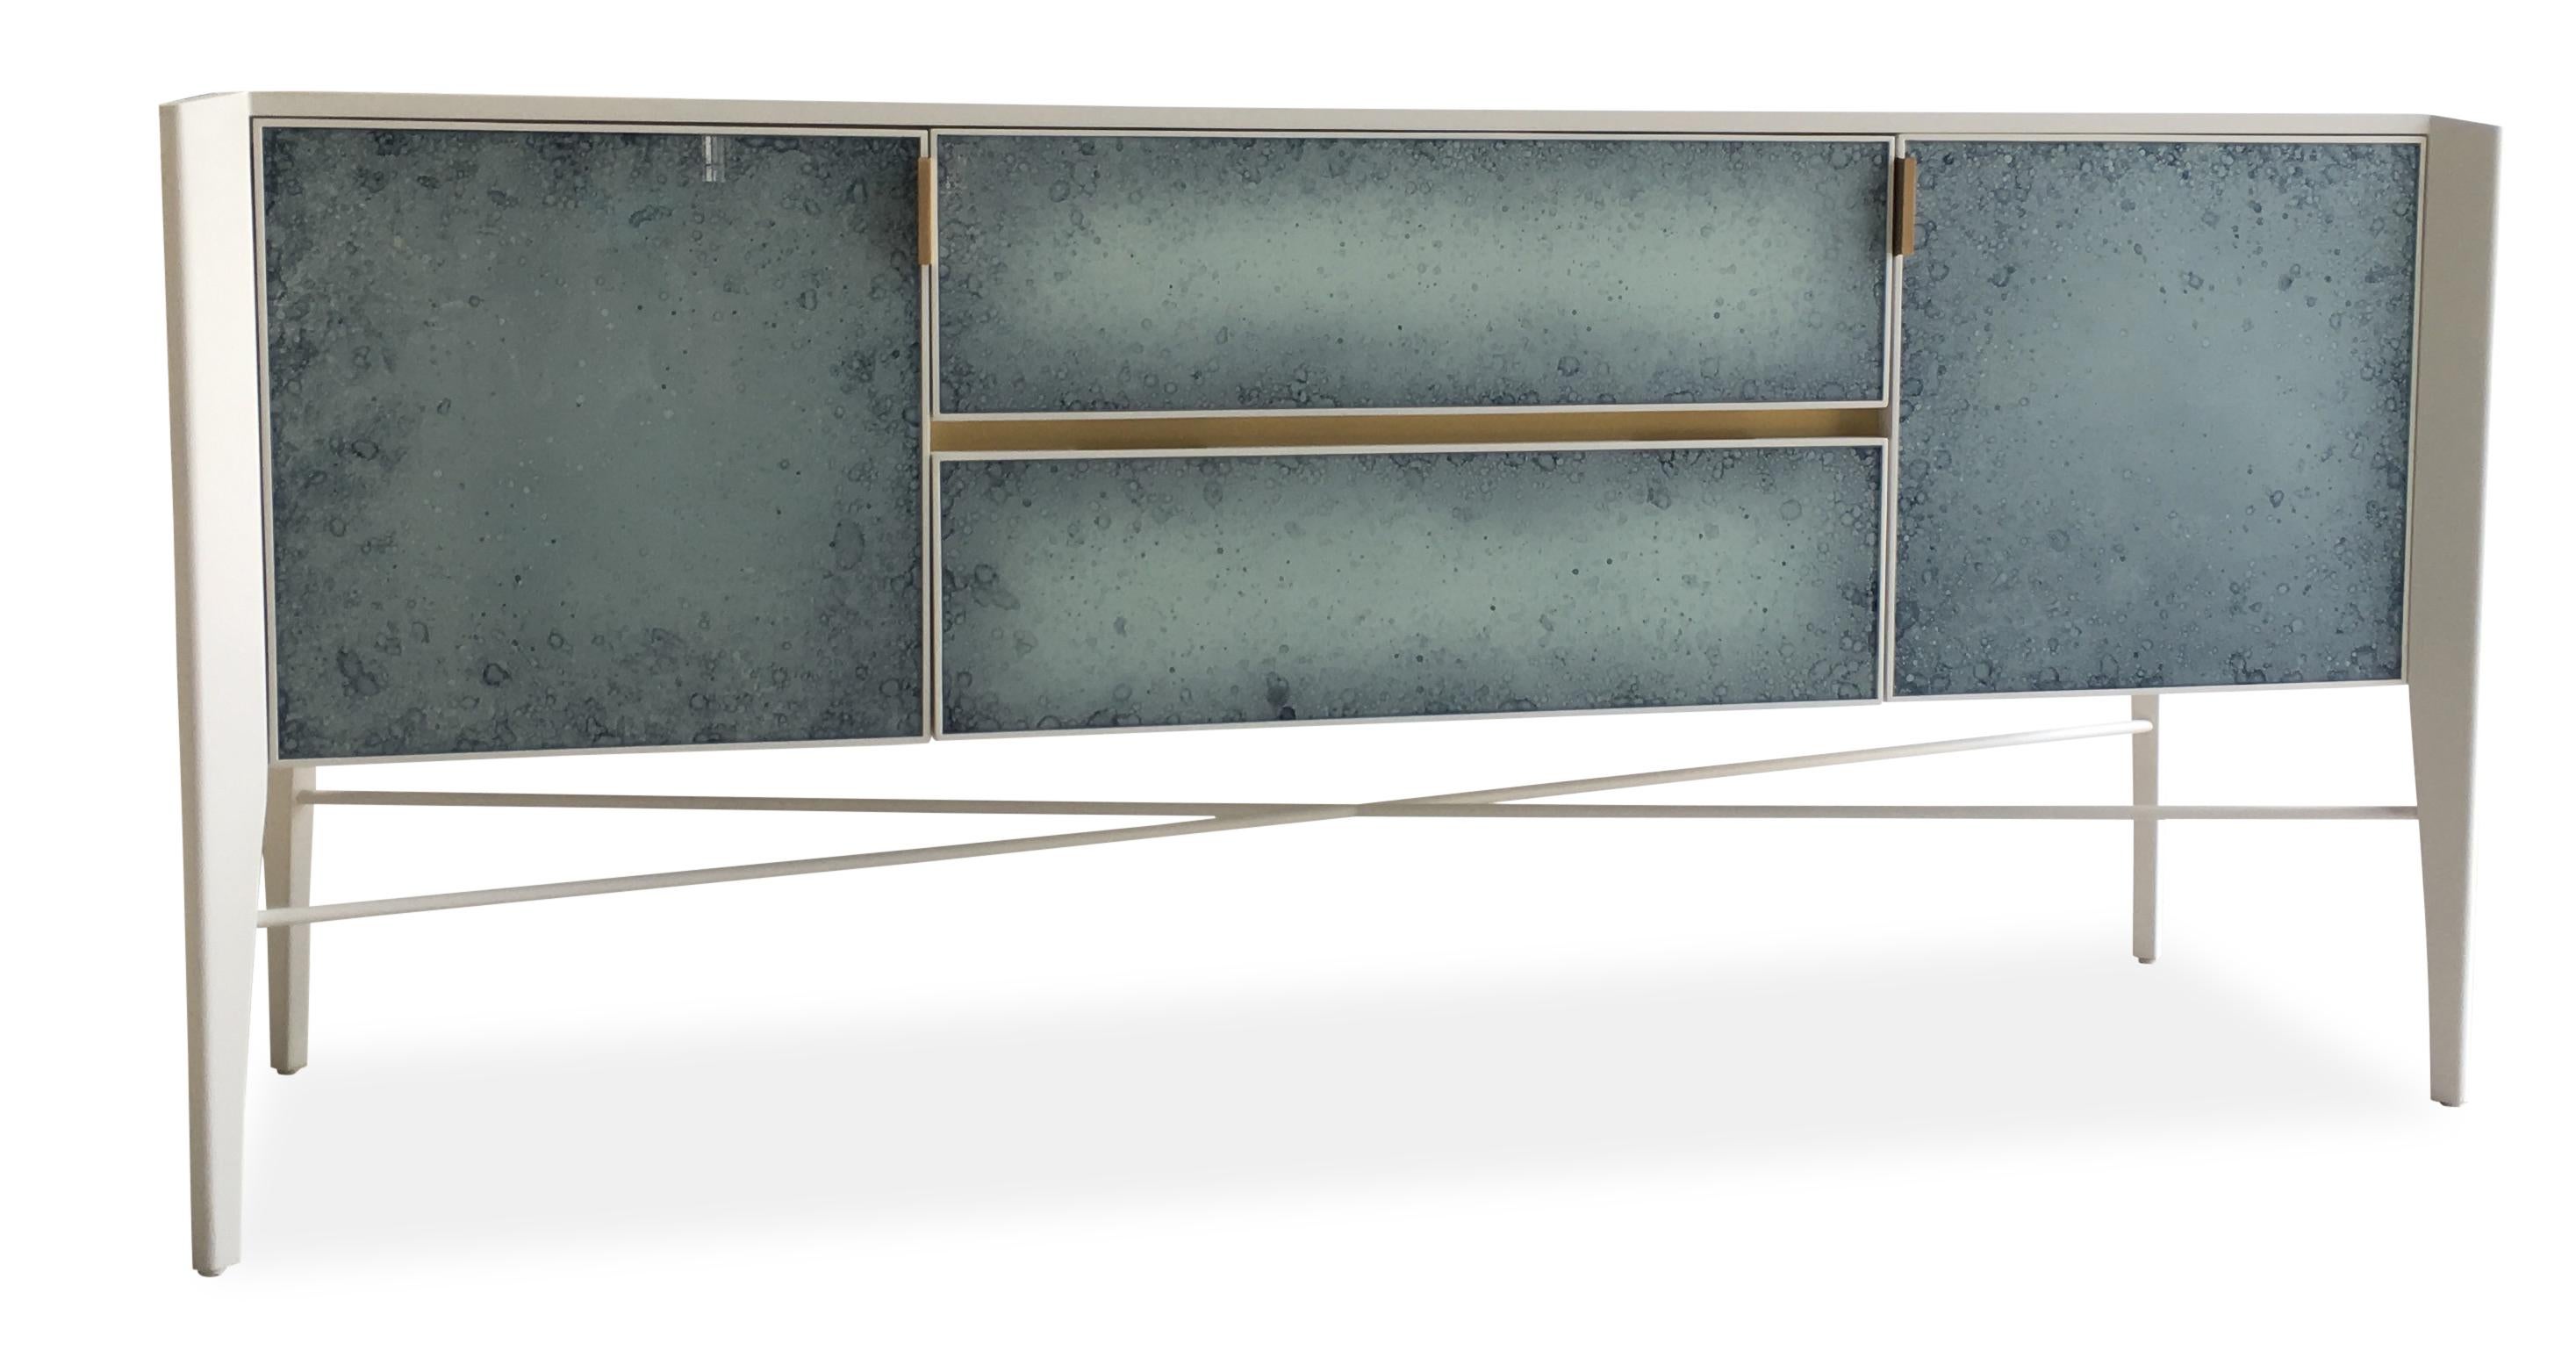 This custom made sideboard is made in a high gloss finish of the top of an American oak frame. 

Solid custom made hardware combined with antique glass door and draw fronts which has a blue coloring added to the finishing process to give the